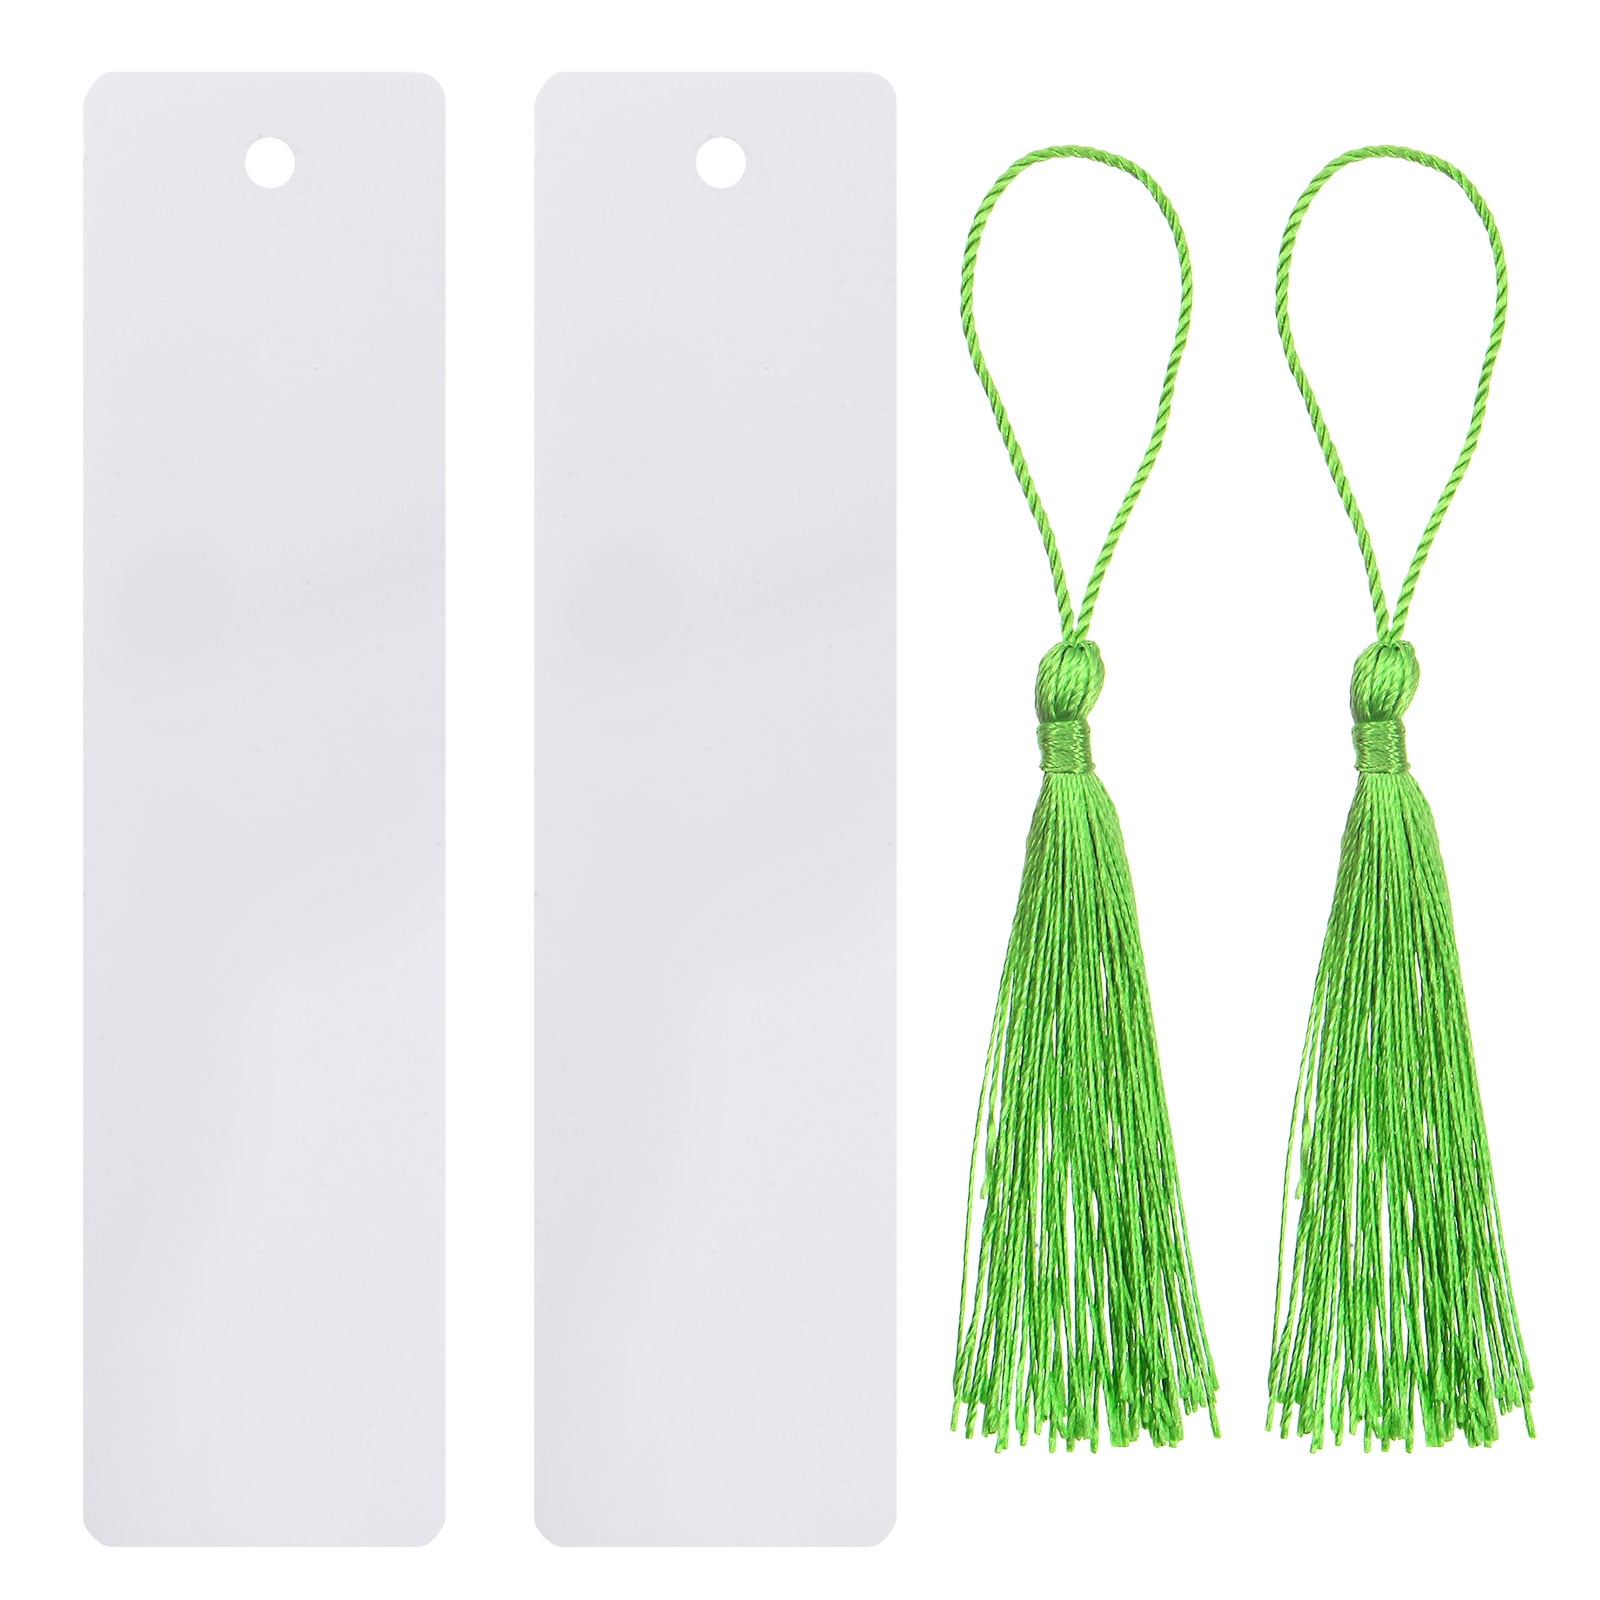 QWLWBU 60 Pcs Sublimation Bookmark Blank with 60 Pcs Colorful Tassels,  Acrylic Bookmark Blanks, Heat Transfer Blank Bookmark for DIY Bookmarks  Crafts